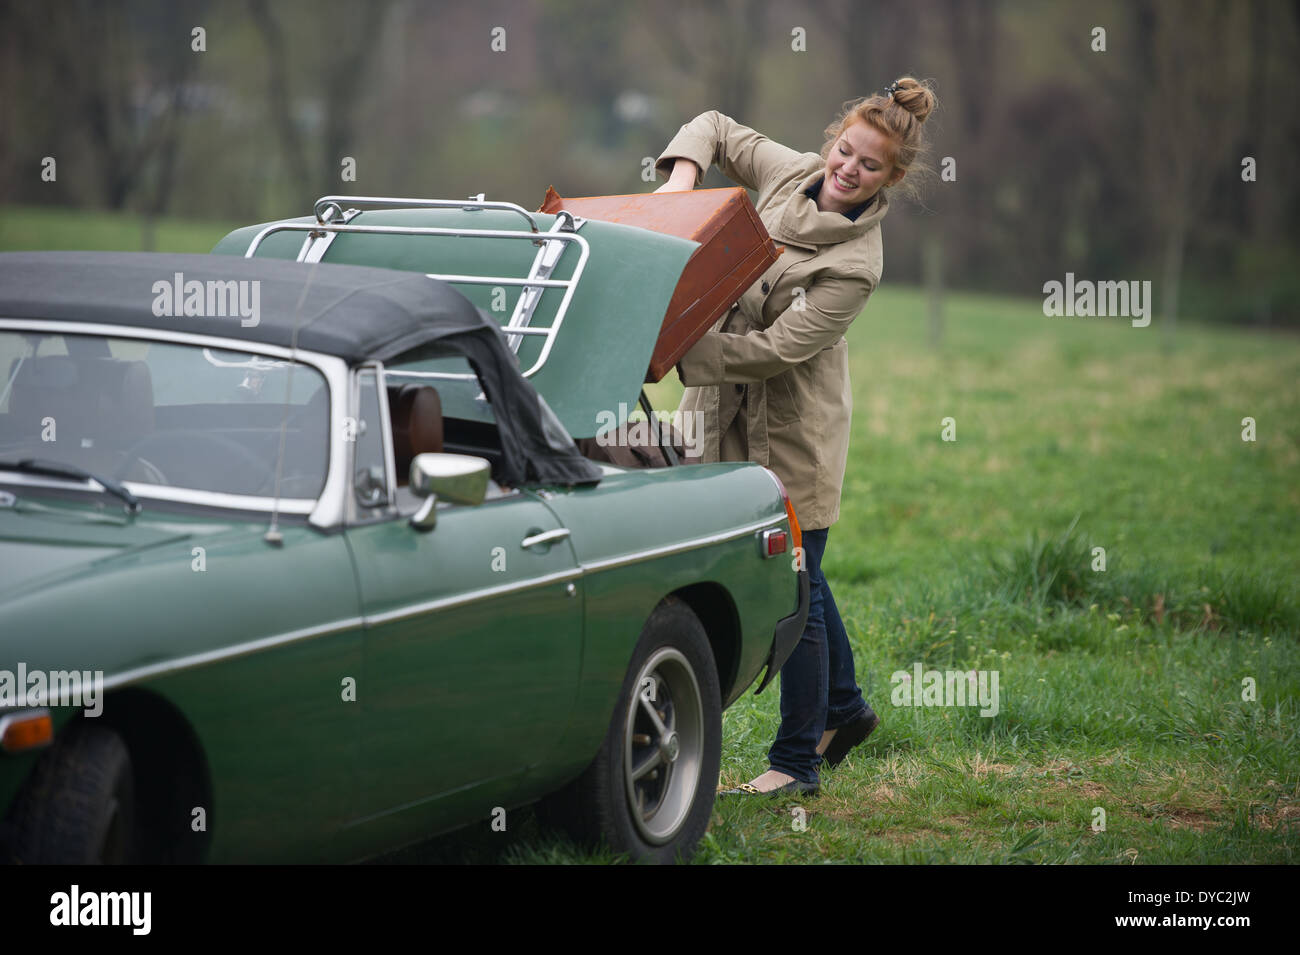 Woman with packed bags on journey next to classic british sports car Stock Photo